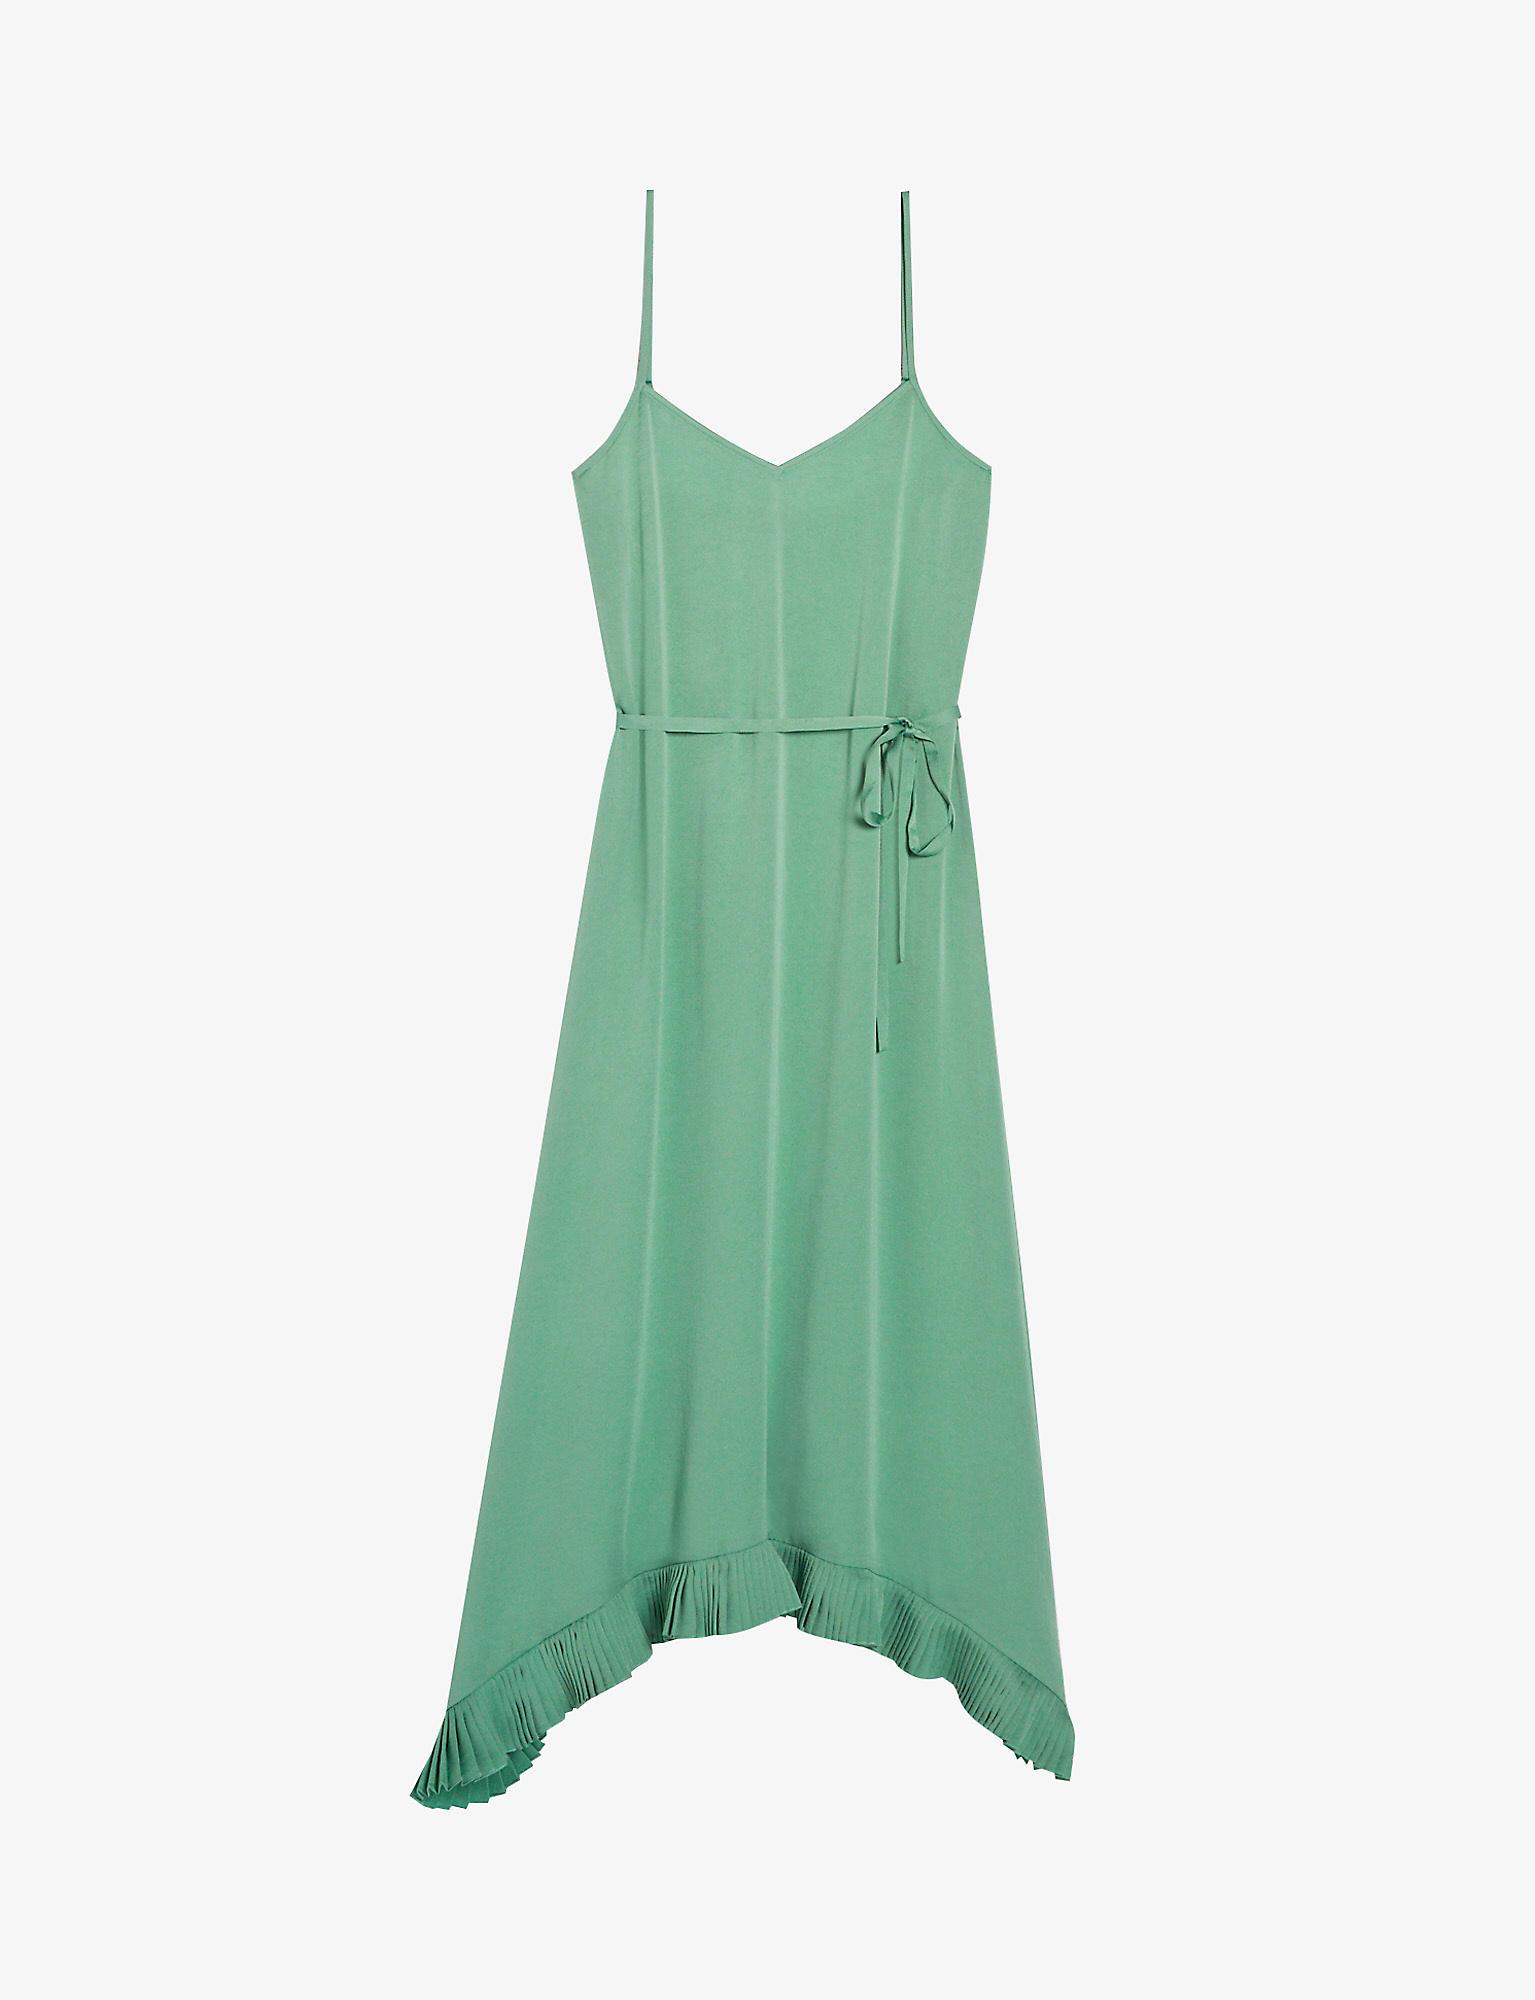 Claudie Pierlot Synthetic Belted Woven Midi Dress in Green | Lyst